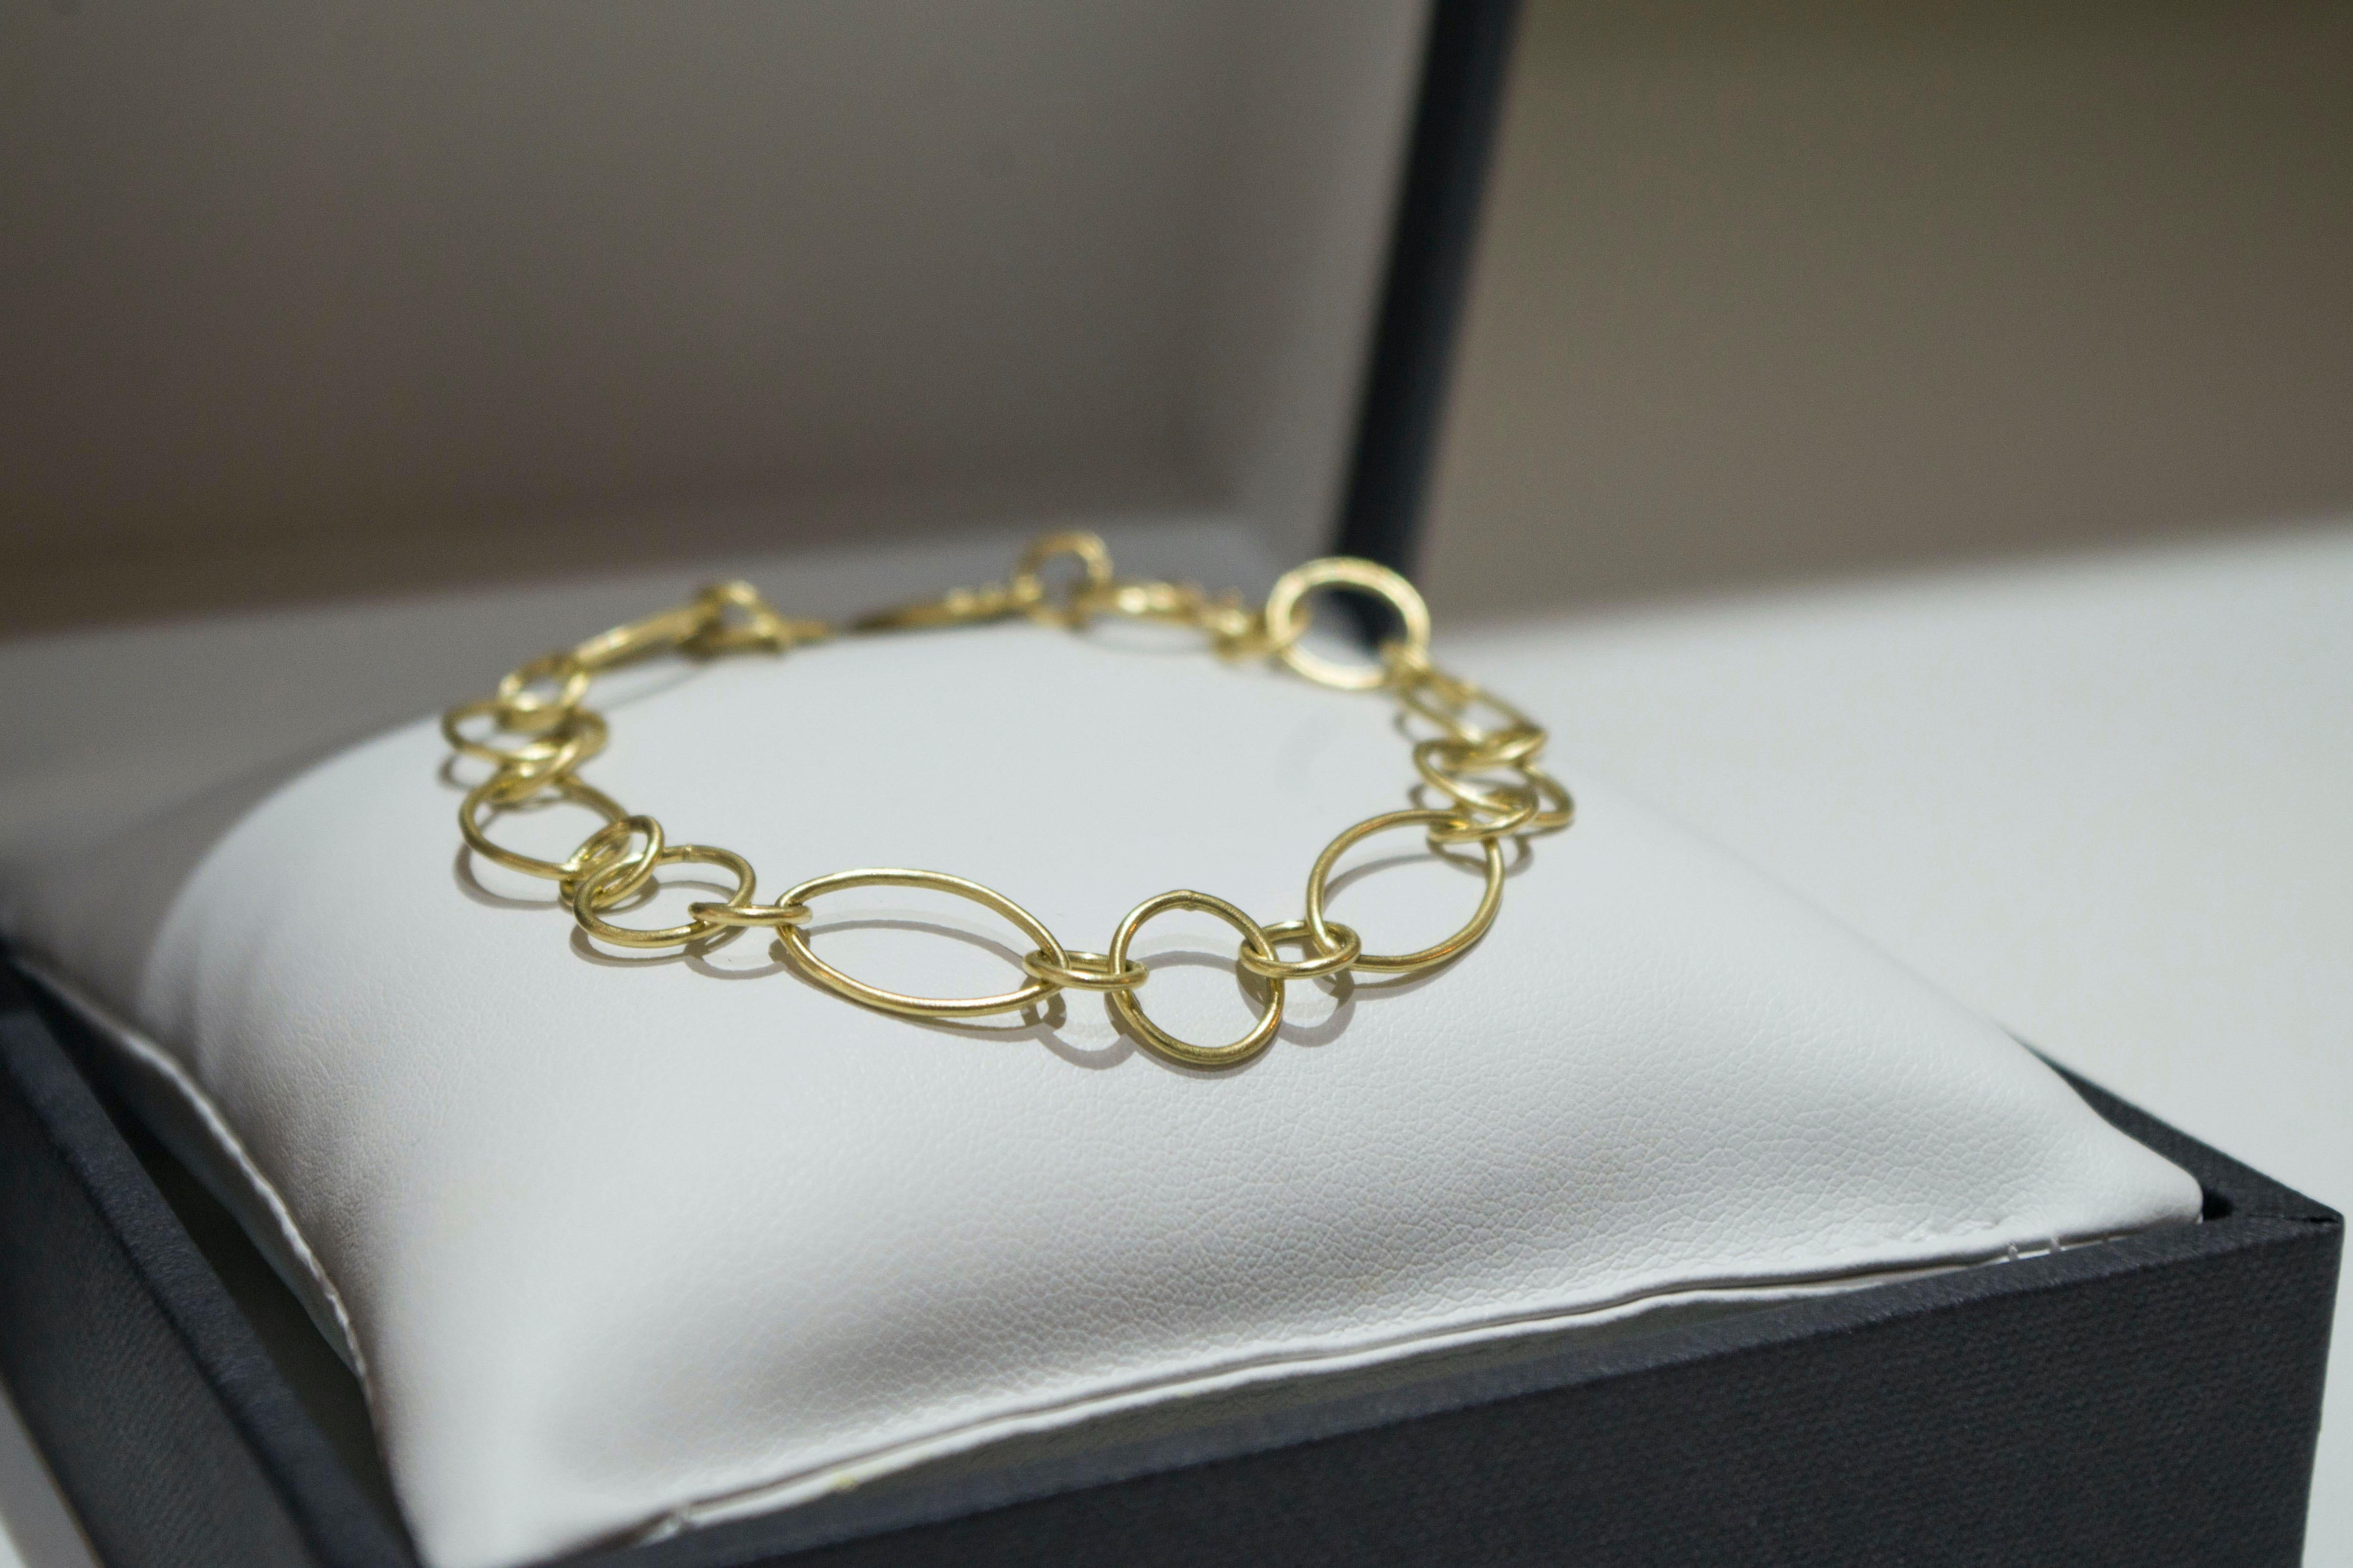 Faye Kim's 18 Karat Gold open link handcrafted bracelet is handcrafted with mixed shapes and sizes.
Matte finished, with a safety hook. Personalize it with your own charms or choose from our selection.

Length: 7